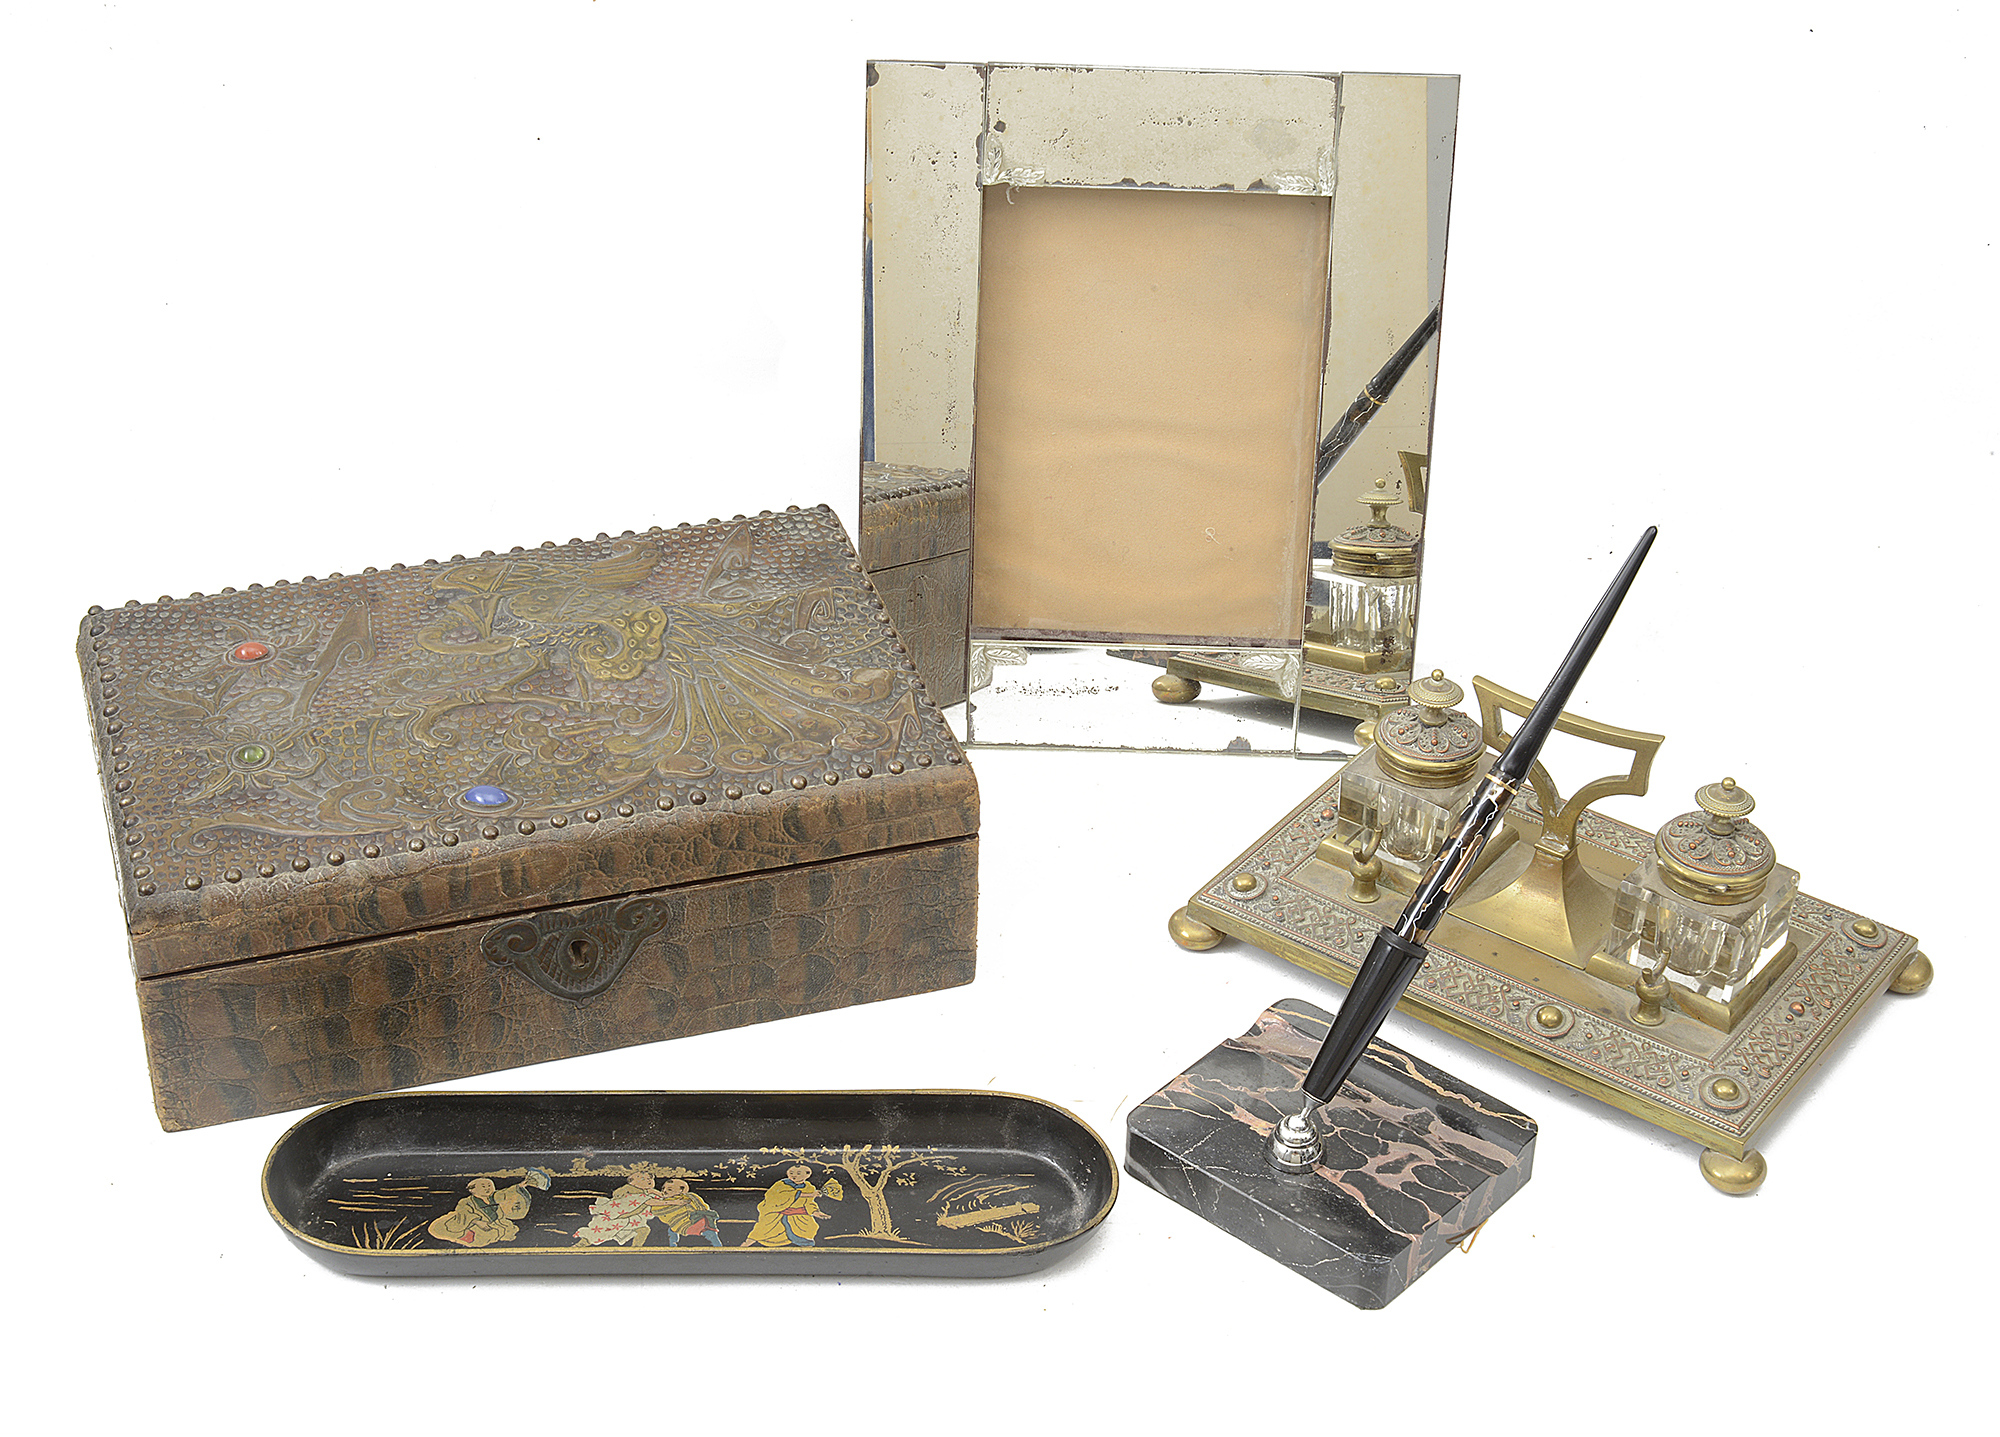 Bayard desk fountain pen, a French brass inkstand and other items